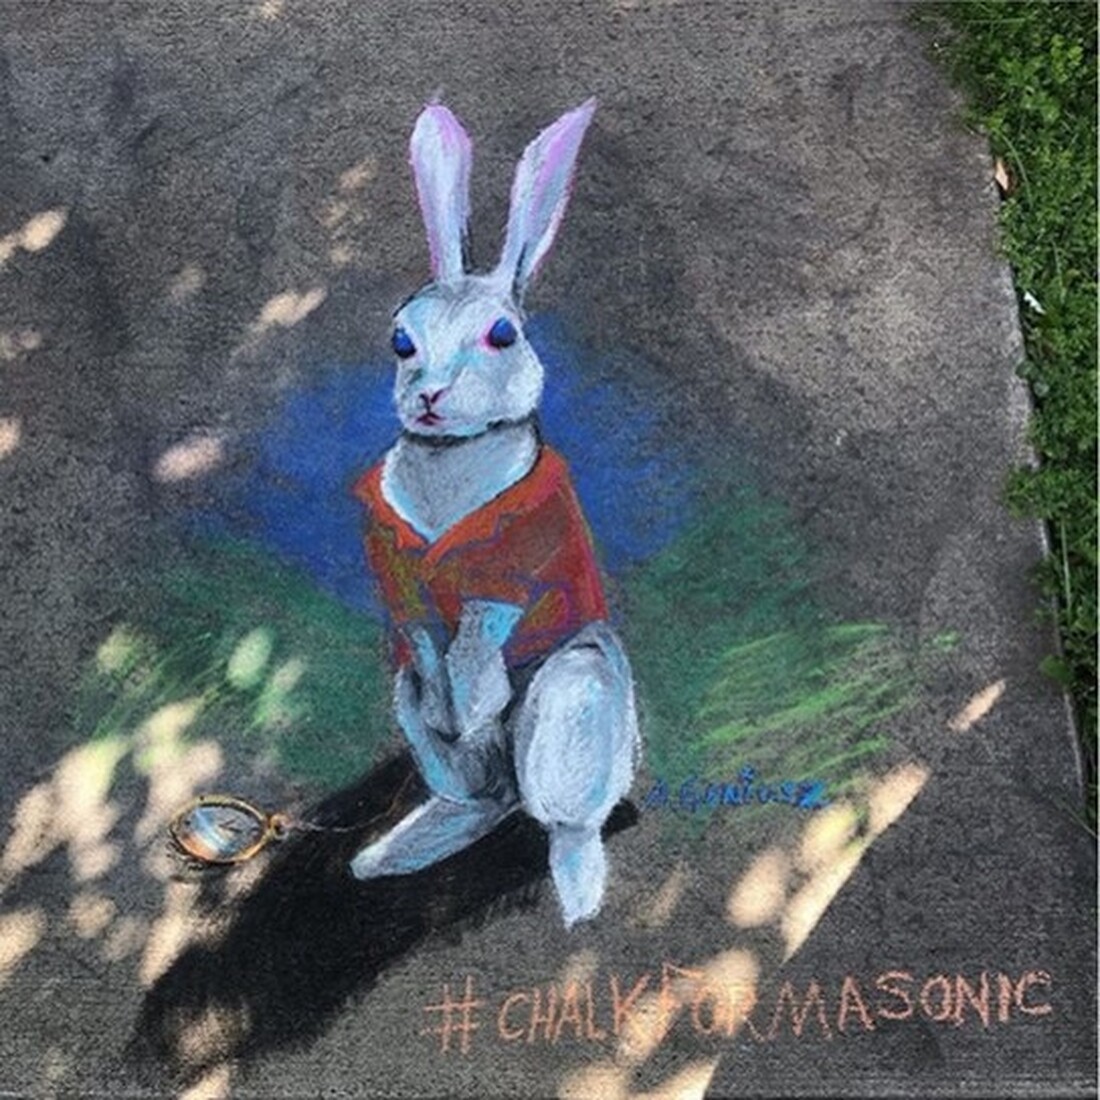 Chalk drawing of a bunny